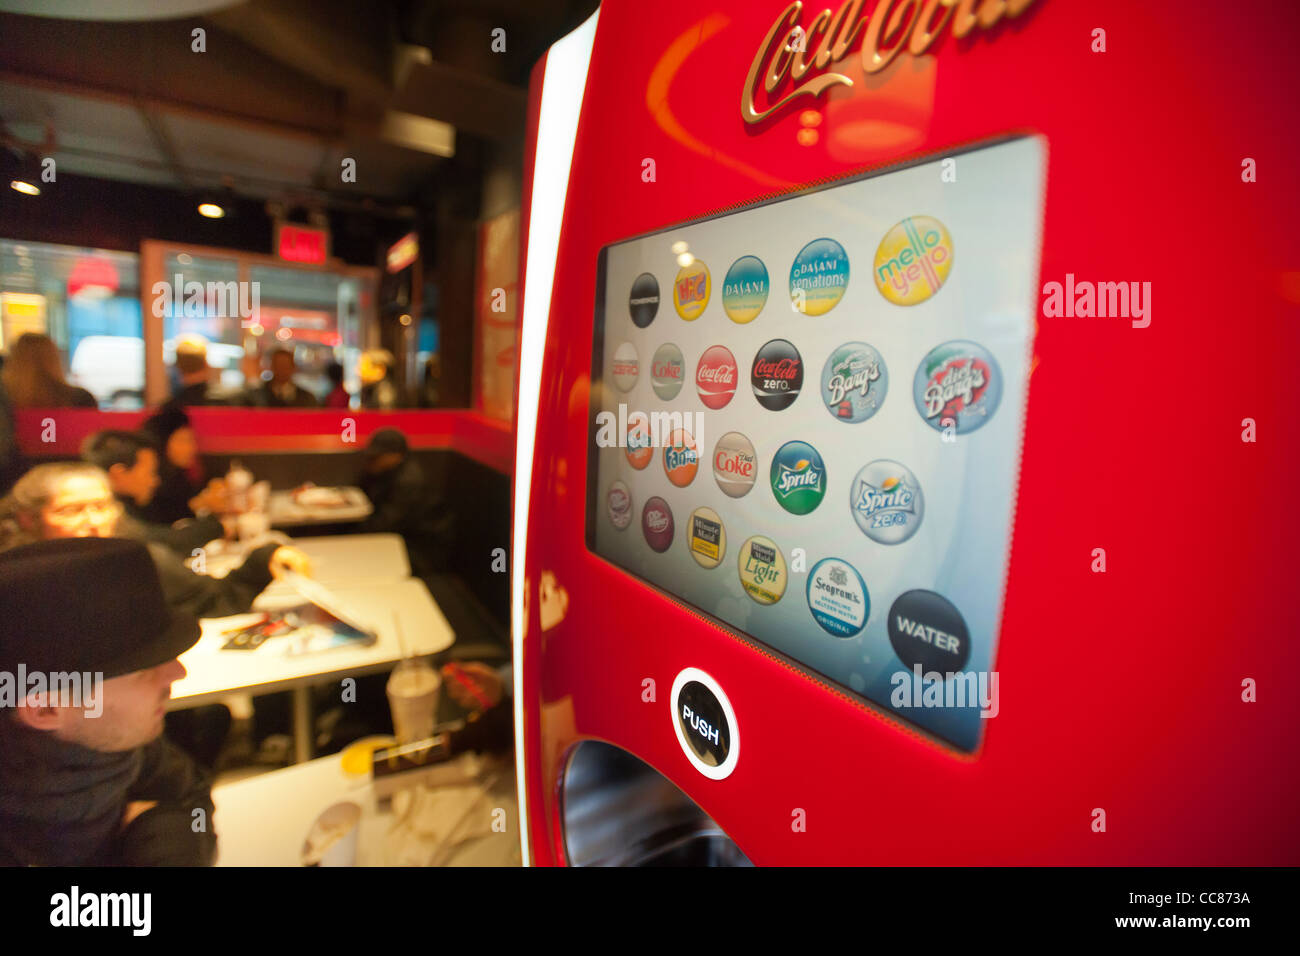 https://c8.alamy.com/comp/CC873A/self-service-drink-machine-with-coca-cola-products-at-the-new-steak-CC873A.jpg